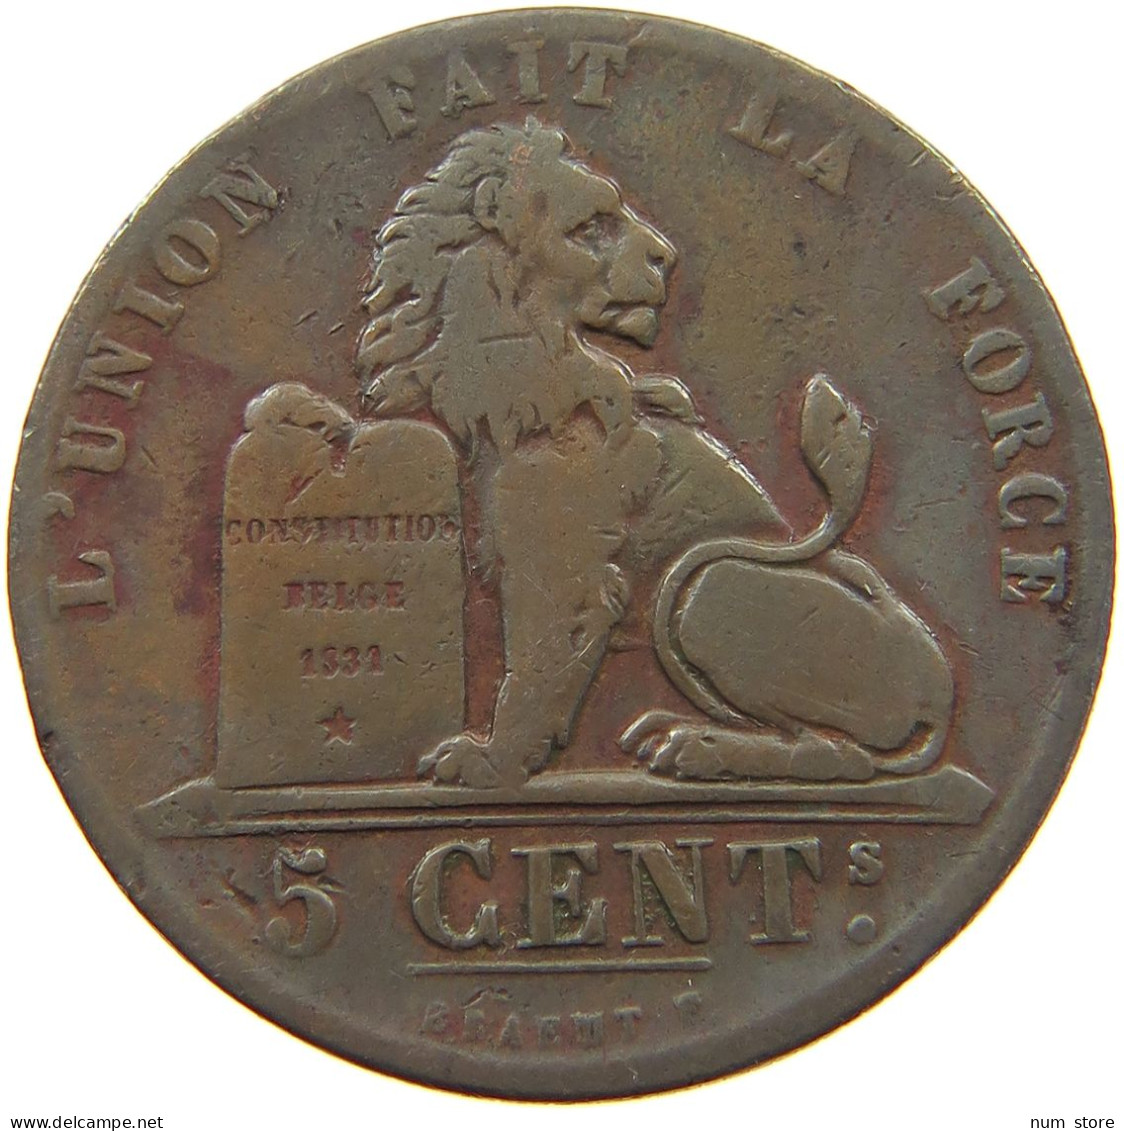 BELGIUM 5 CENTIMES 1851 BELGIUM 5 CENTIMES 1851 LARGE 5 WITH POINT #t132 0577 - 5 Centimes